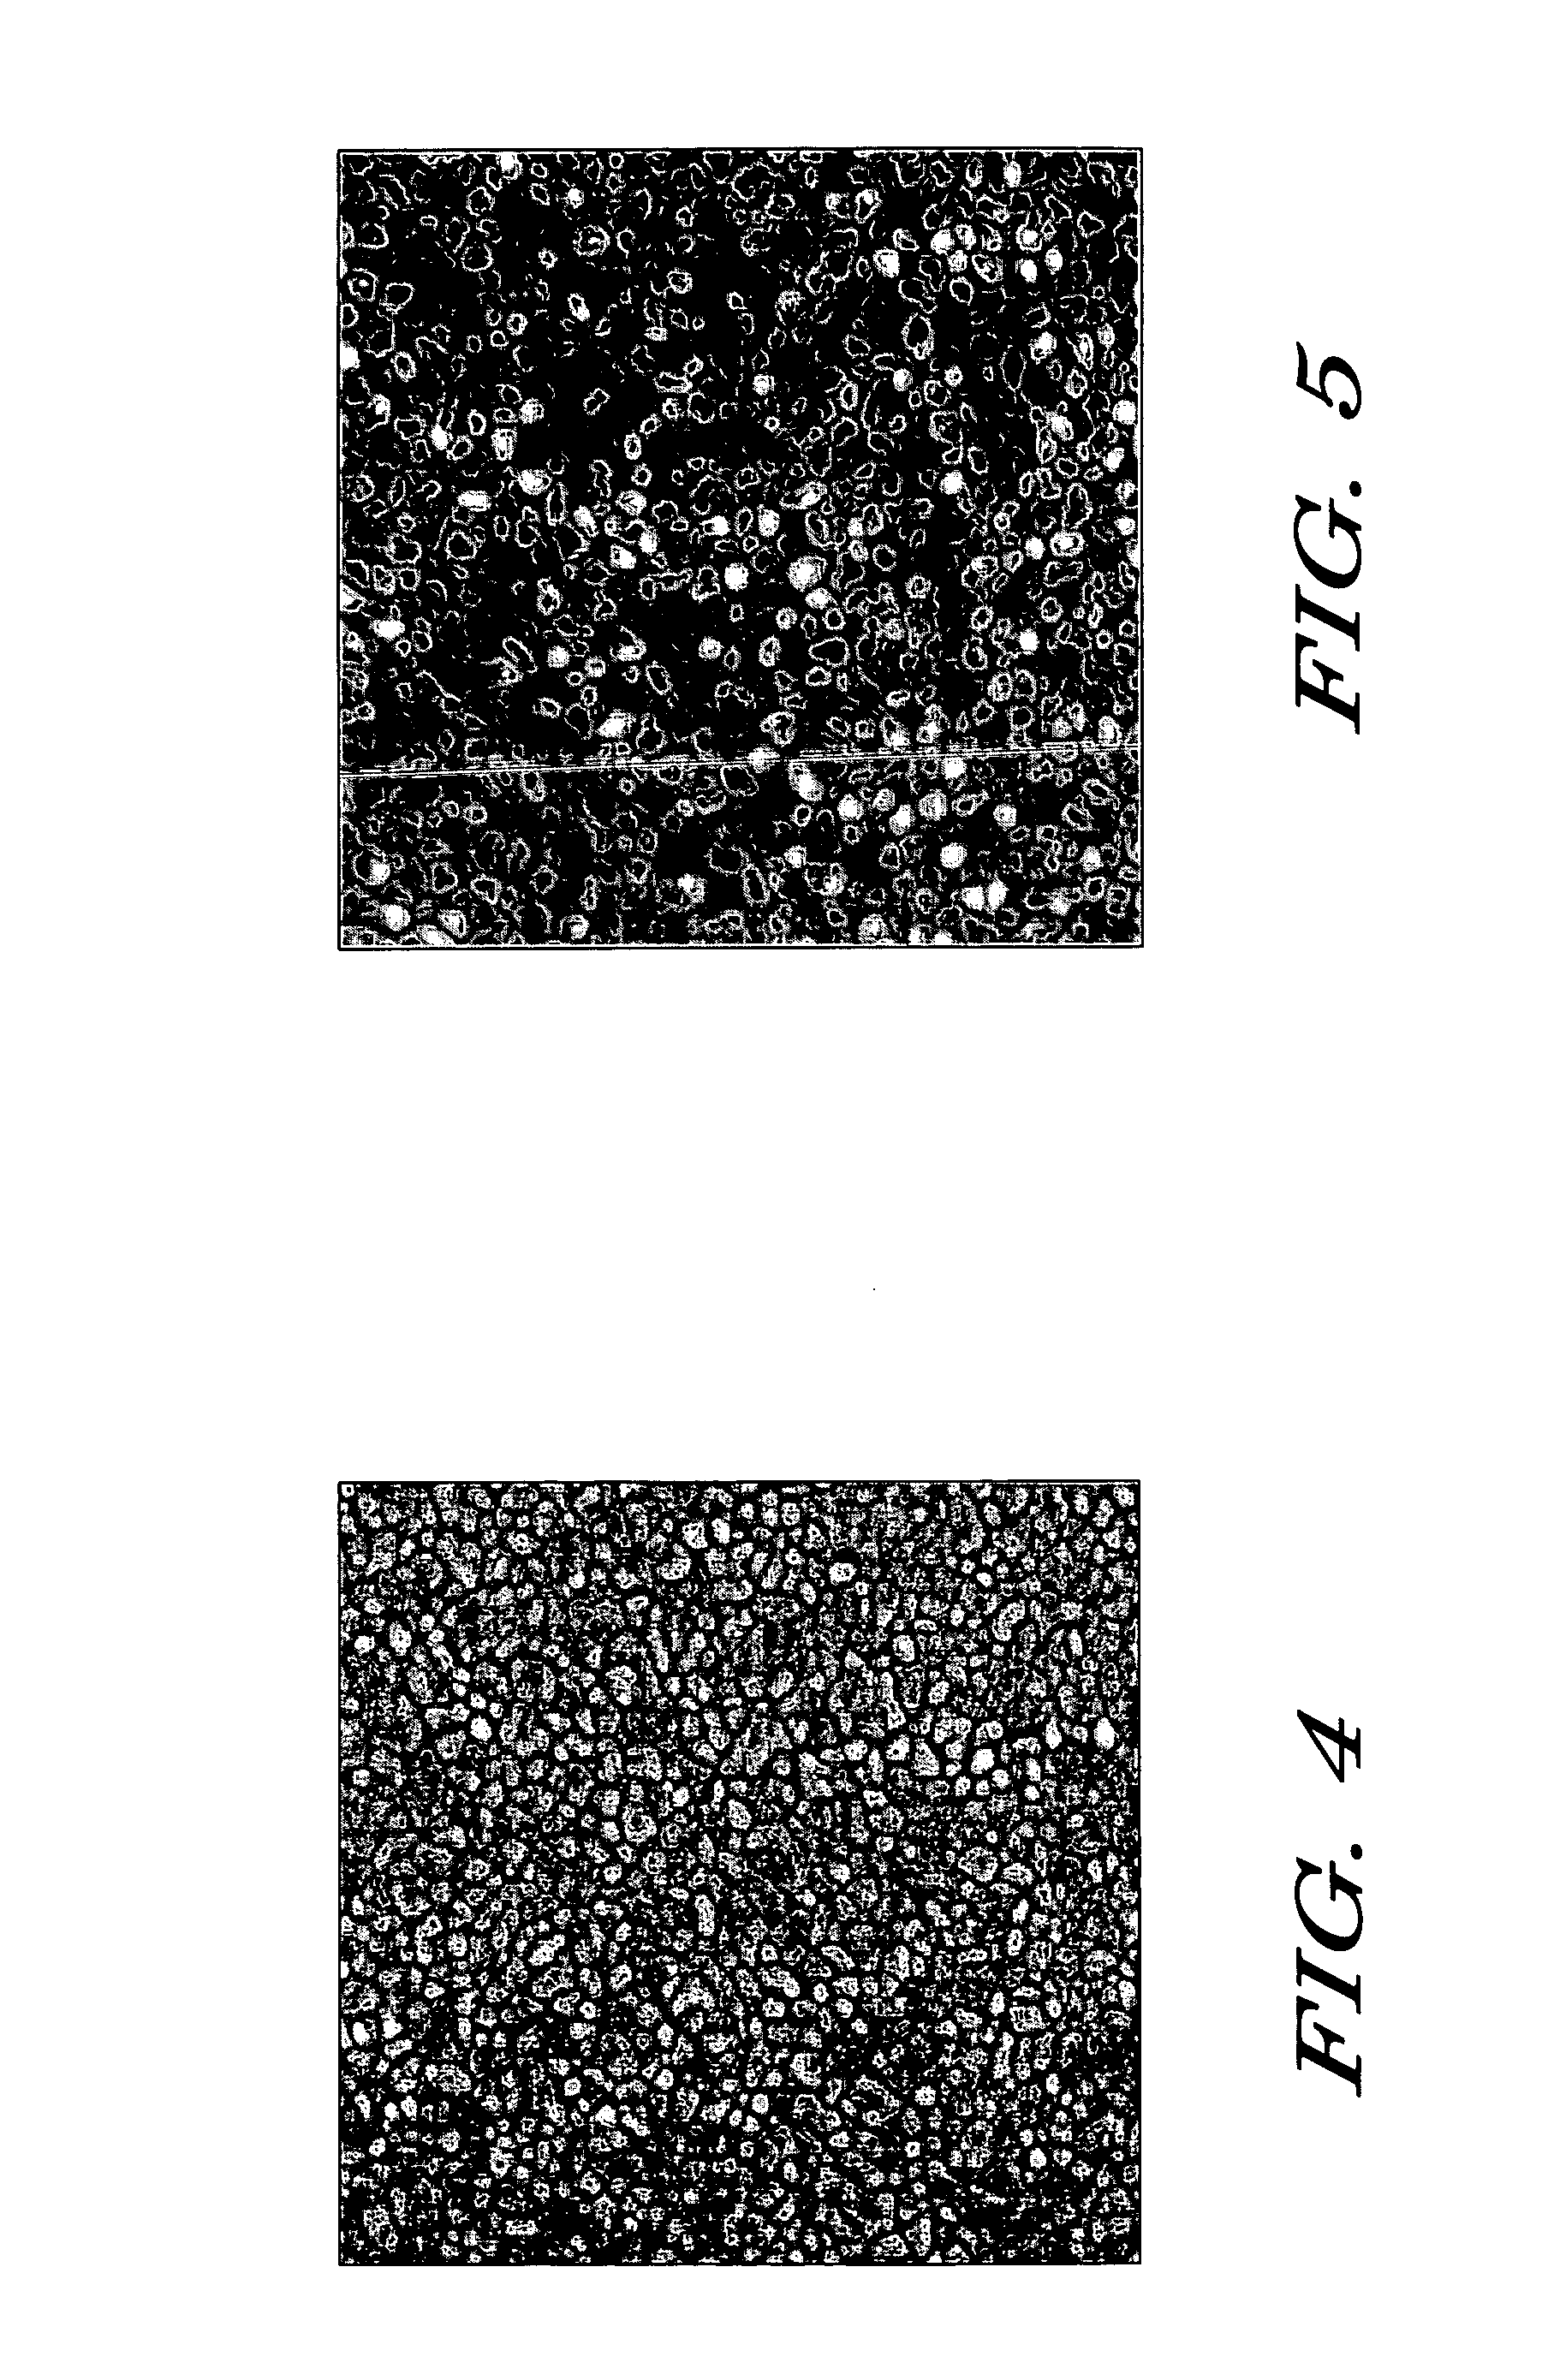 Electronic device including dielectric layer, and a process for forming the electronic device